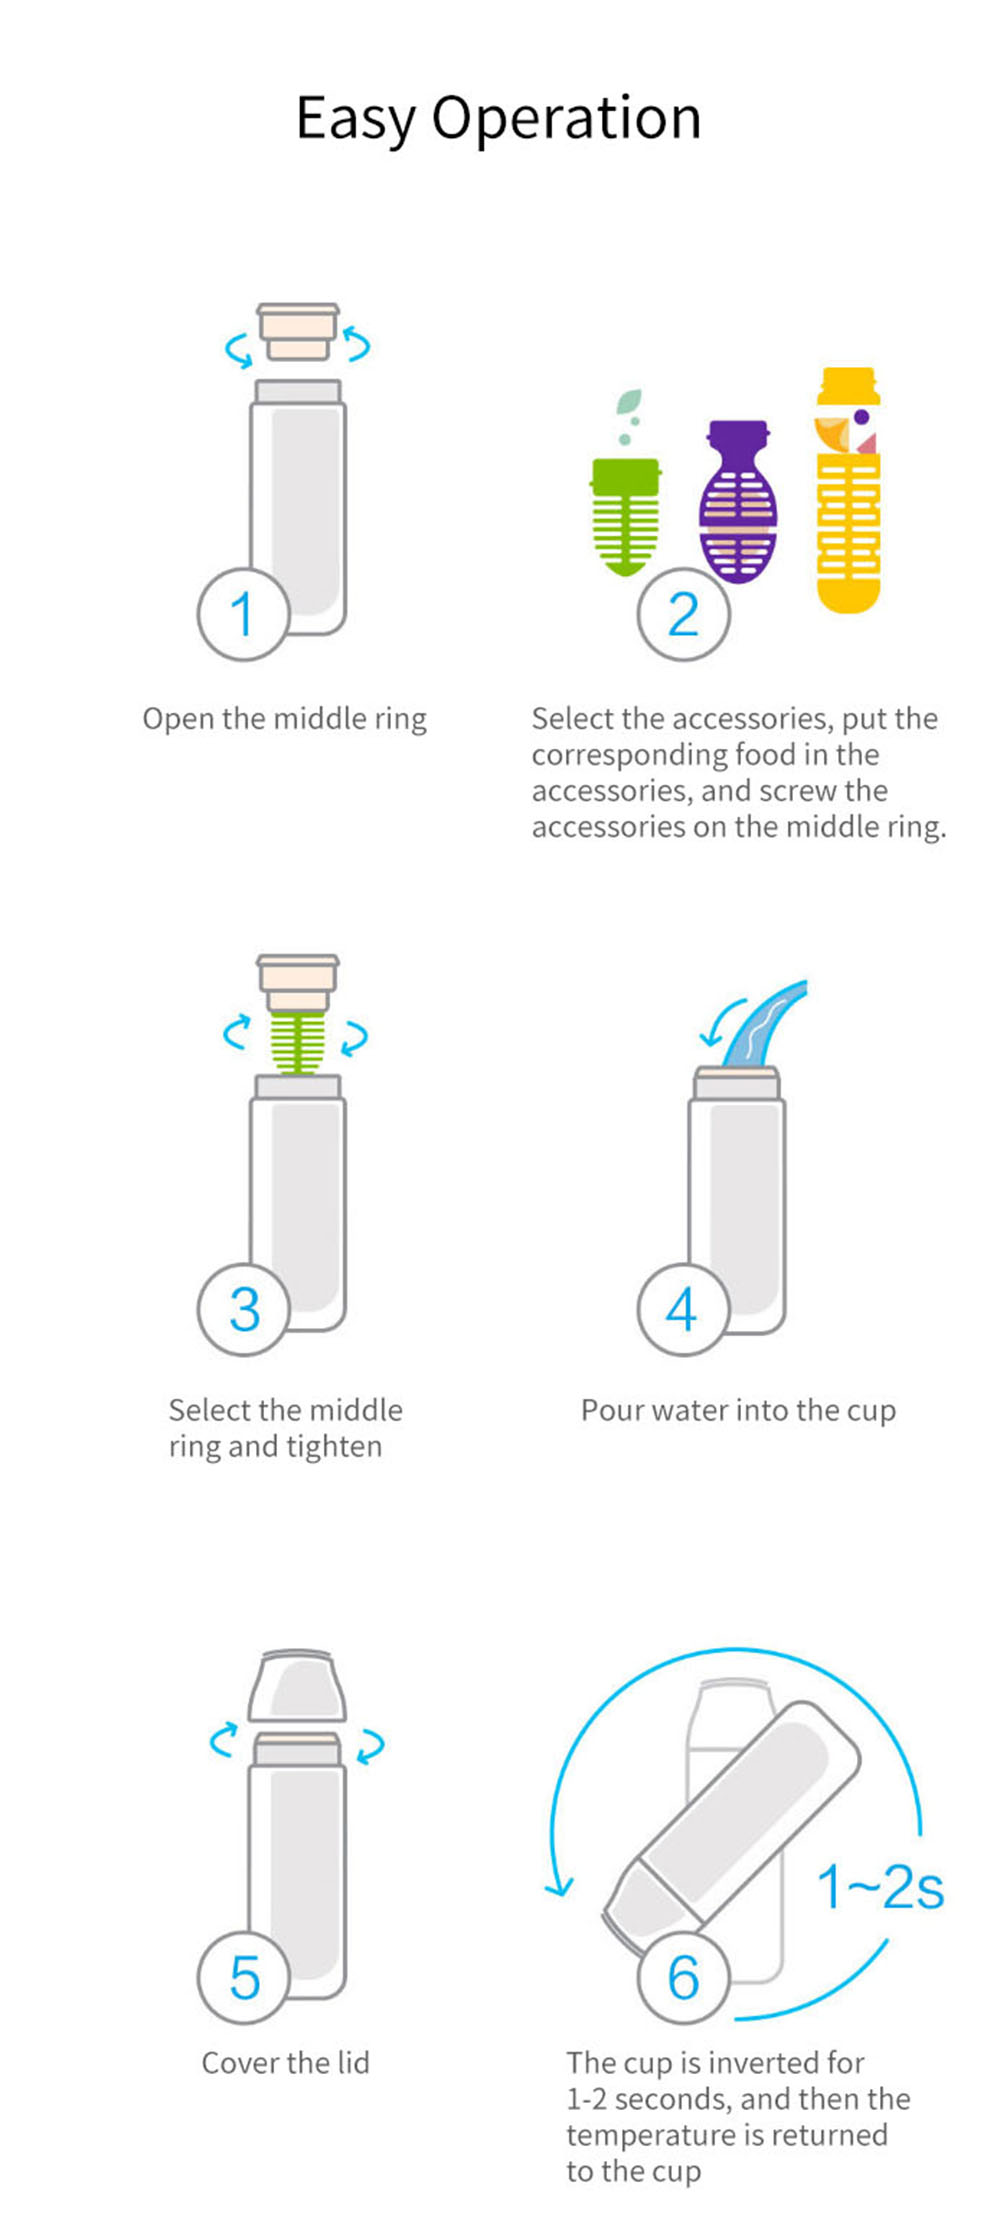 Kiss Fish CC Smart Water Bottle with Temperature Display from Xiaomi youpin